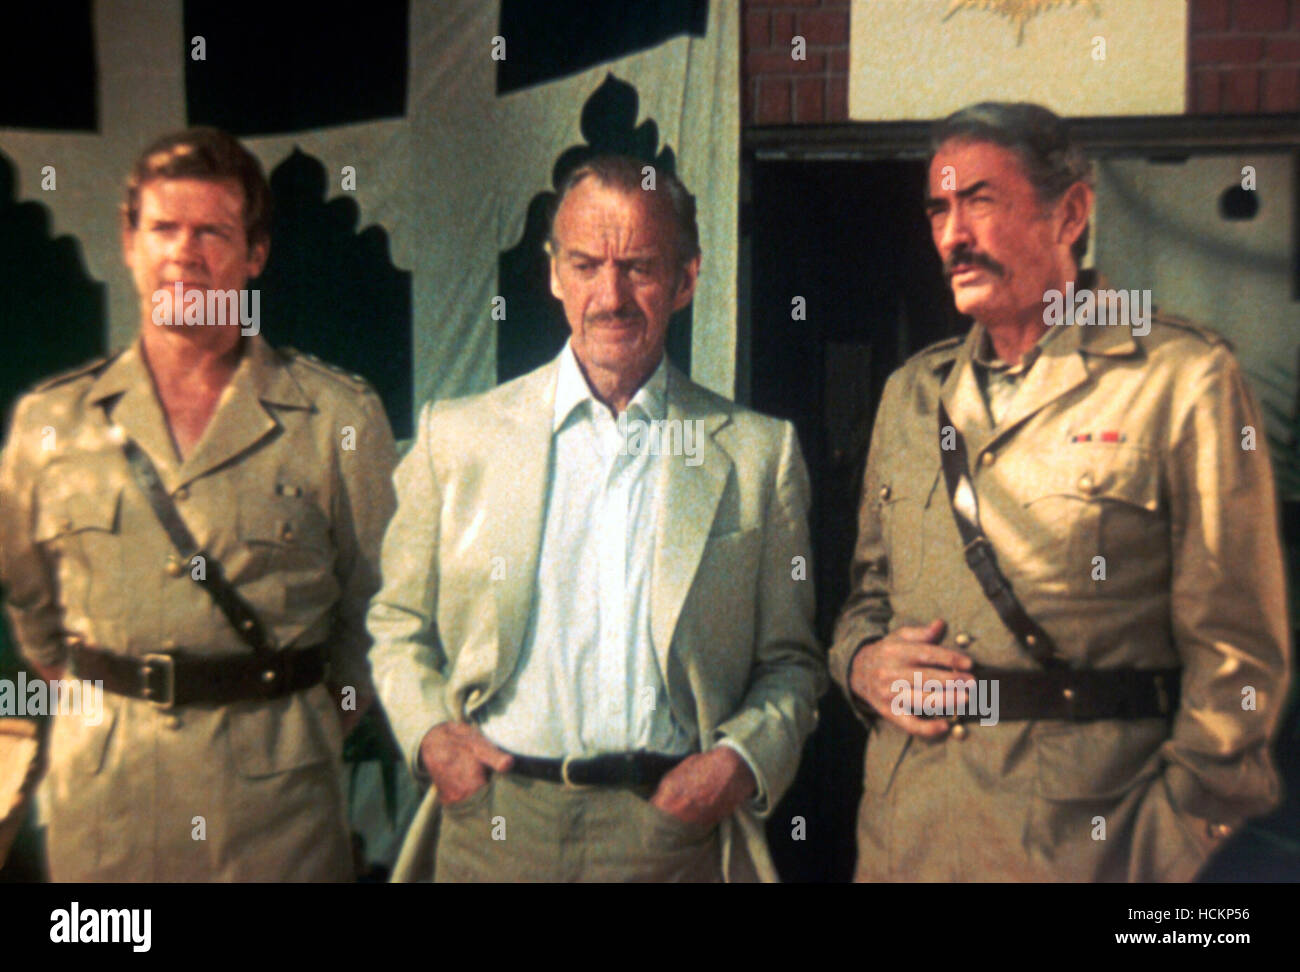 THE SEA WOLVES, from left: Roger Moore, David Niven, Gregory Peck, 1980, ©  Paramount/courtesy Everett Collection Stock Photo - Alamy